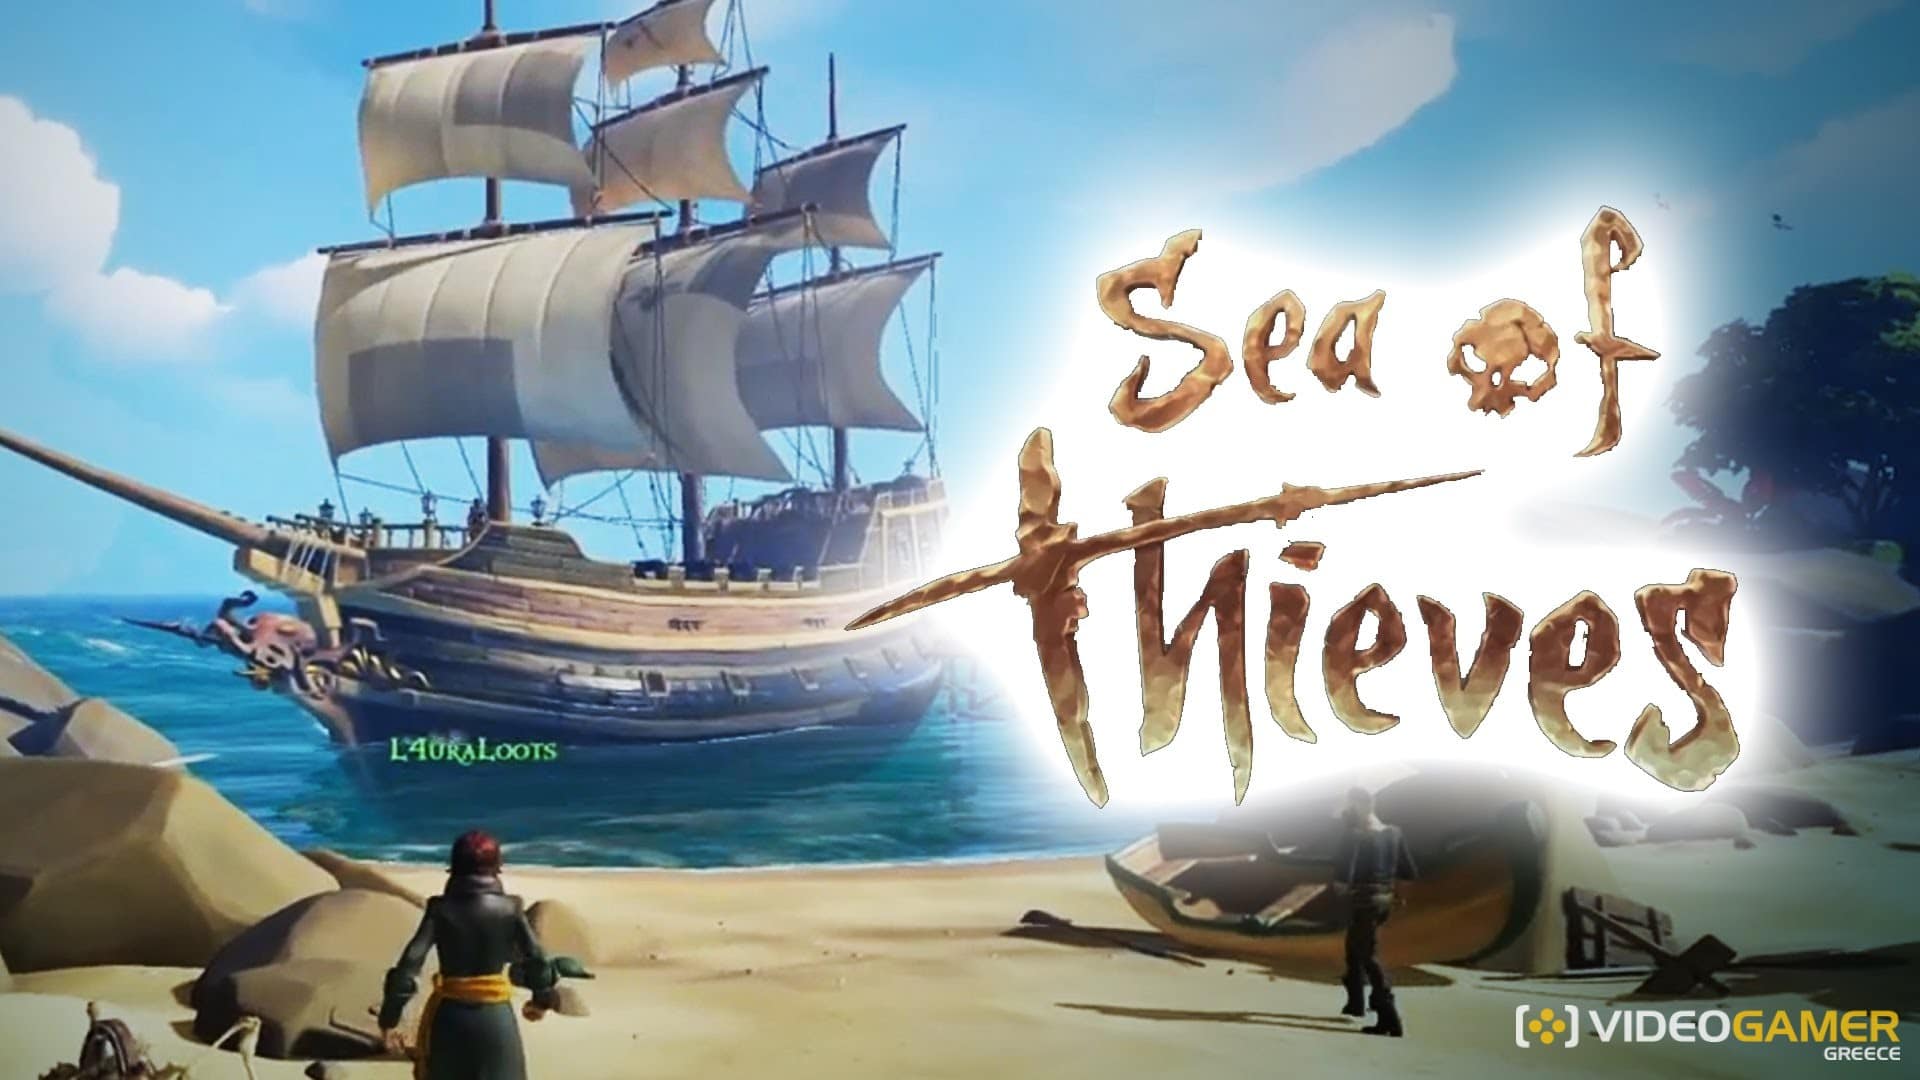 Sea of Thieves - videogamer.gr